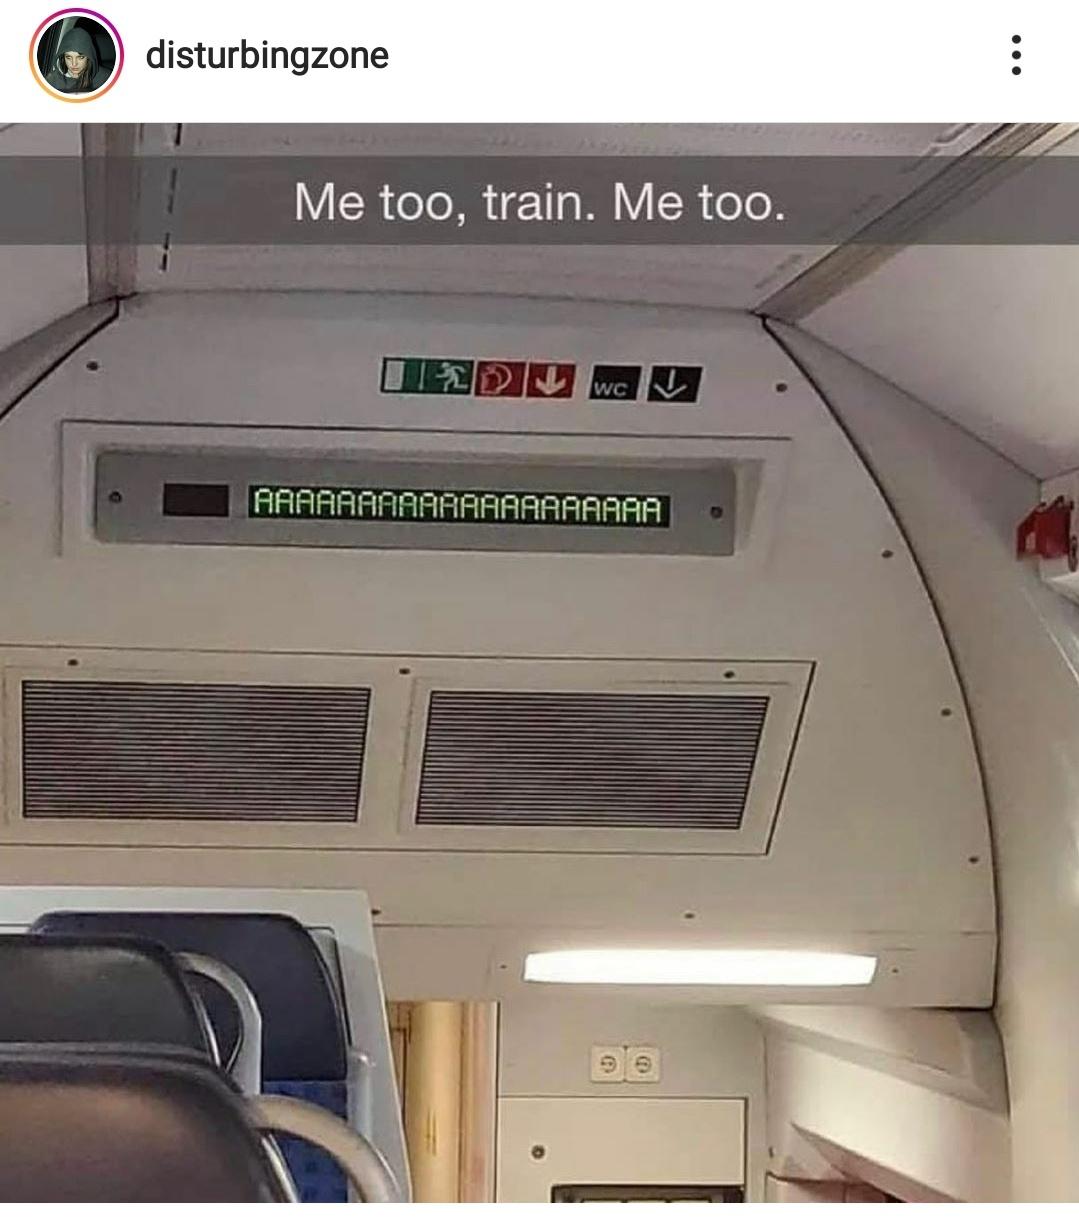 Now that's a train I can get to Georgia on...